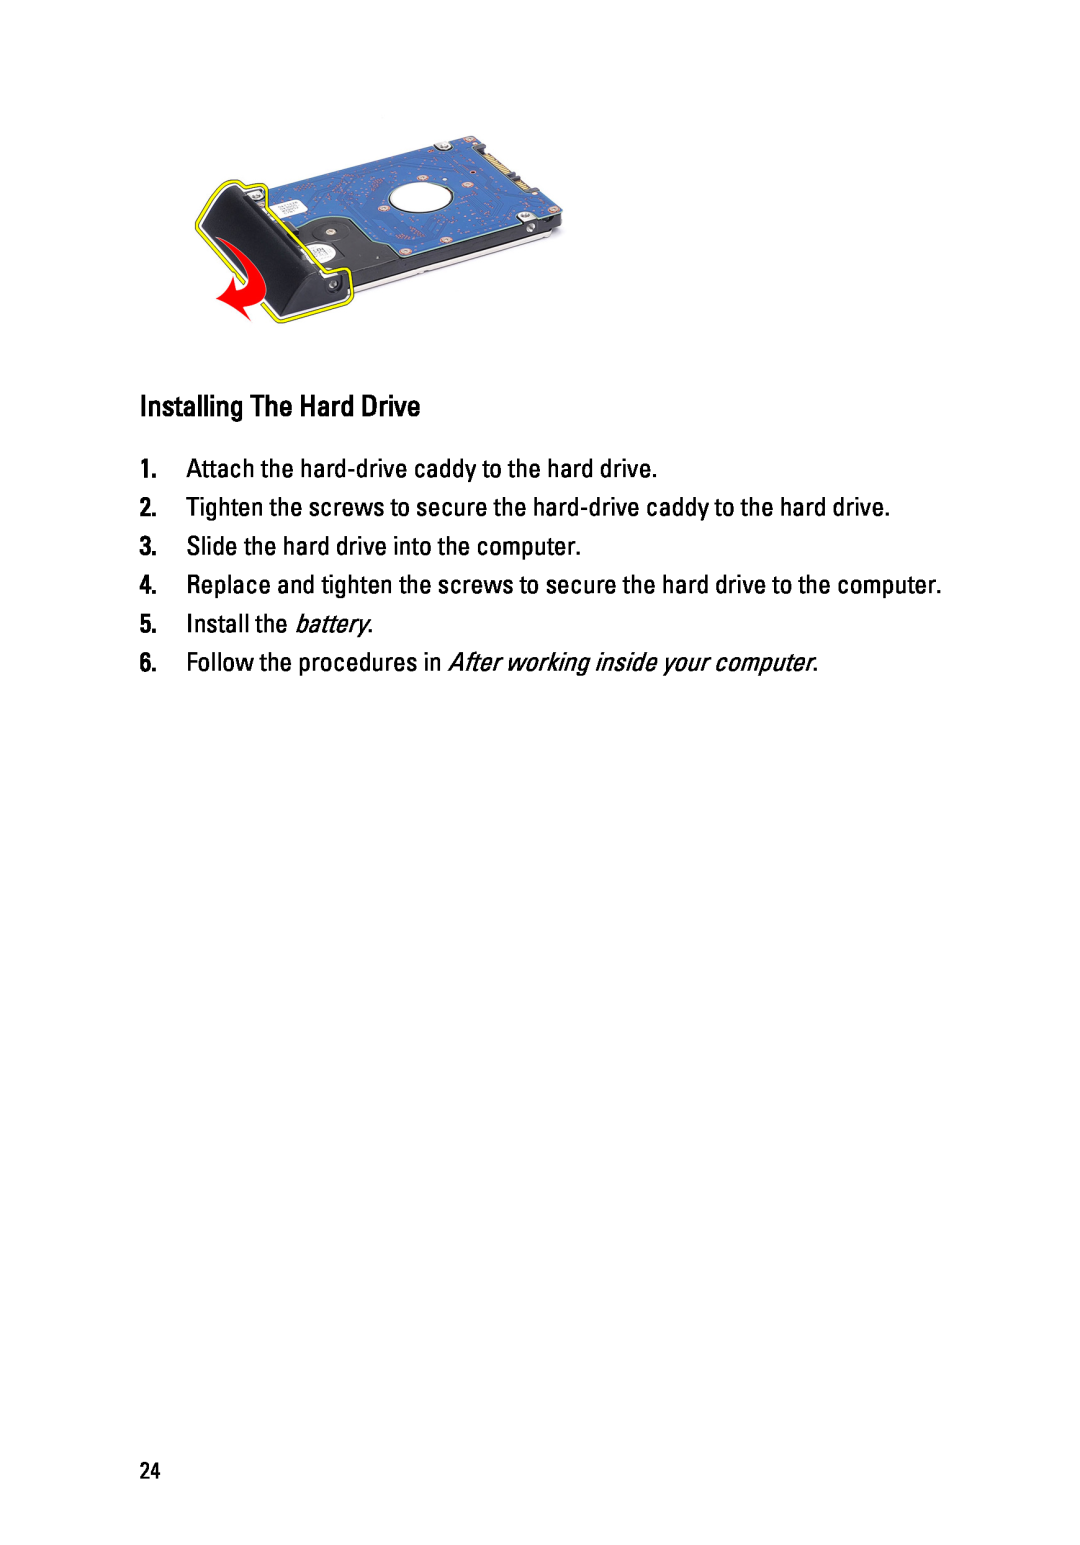 Dell E6520 owner manual Installing The Hard Drive, Attach the hard-drive caddy to the hard drive, Install the battery 